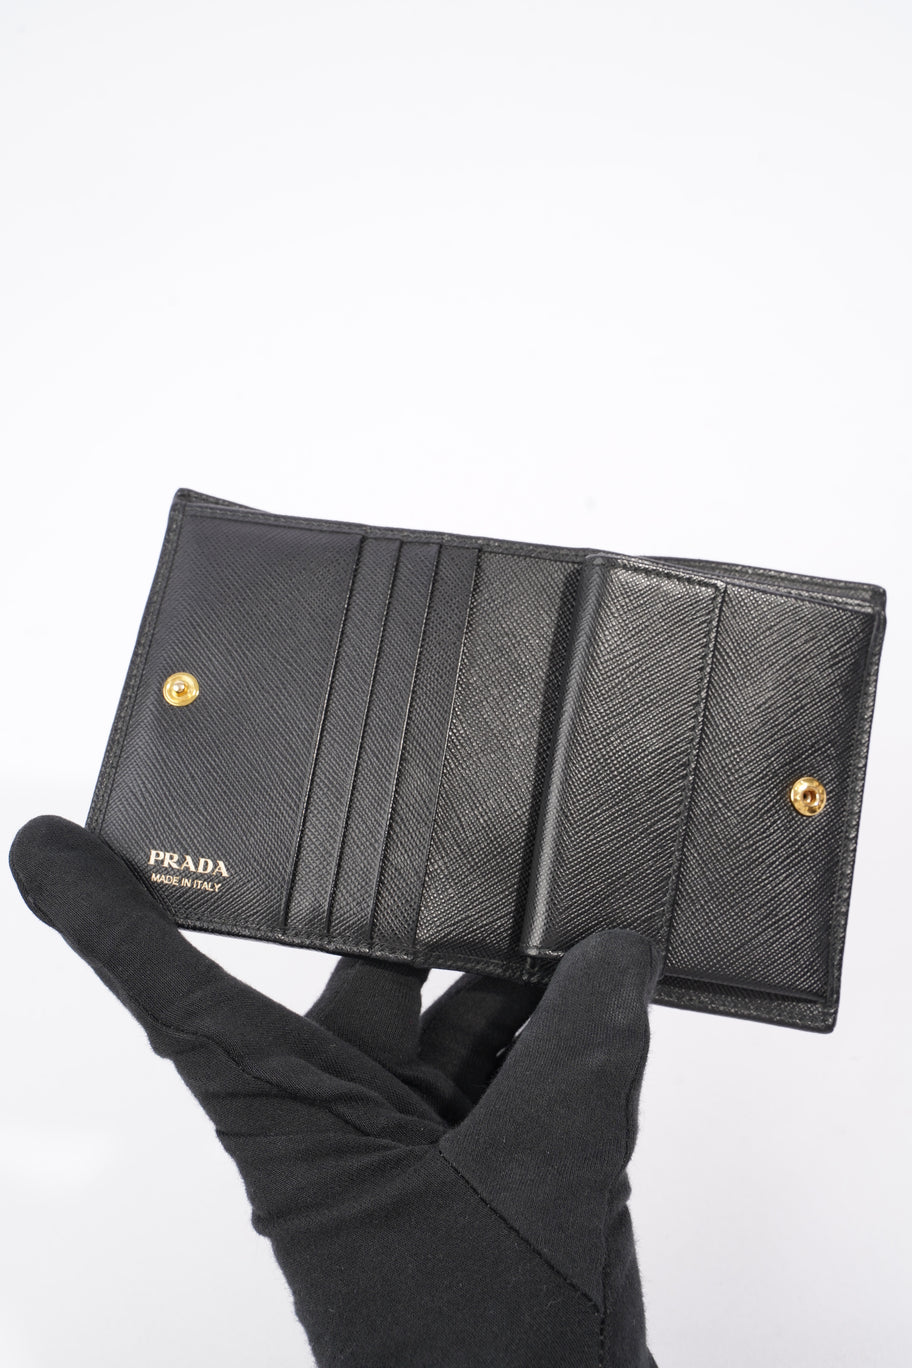 Compact Wallet Black Saffiano Leather Image 5